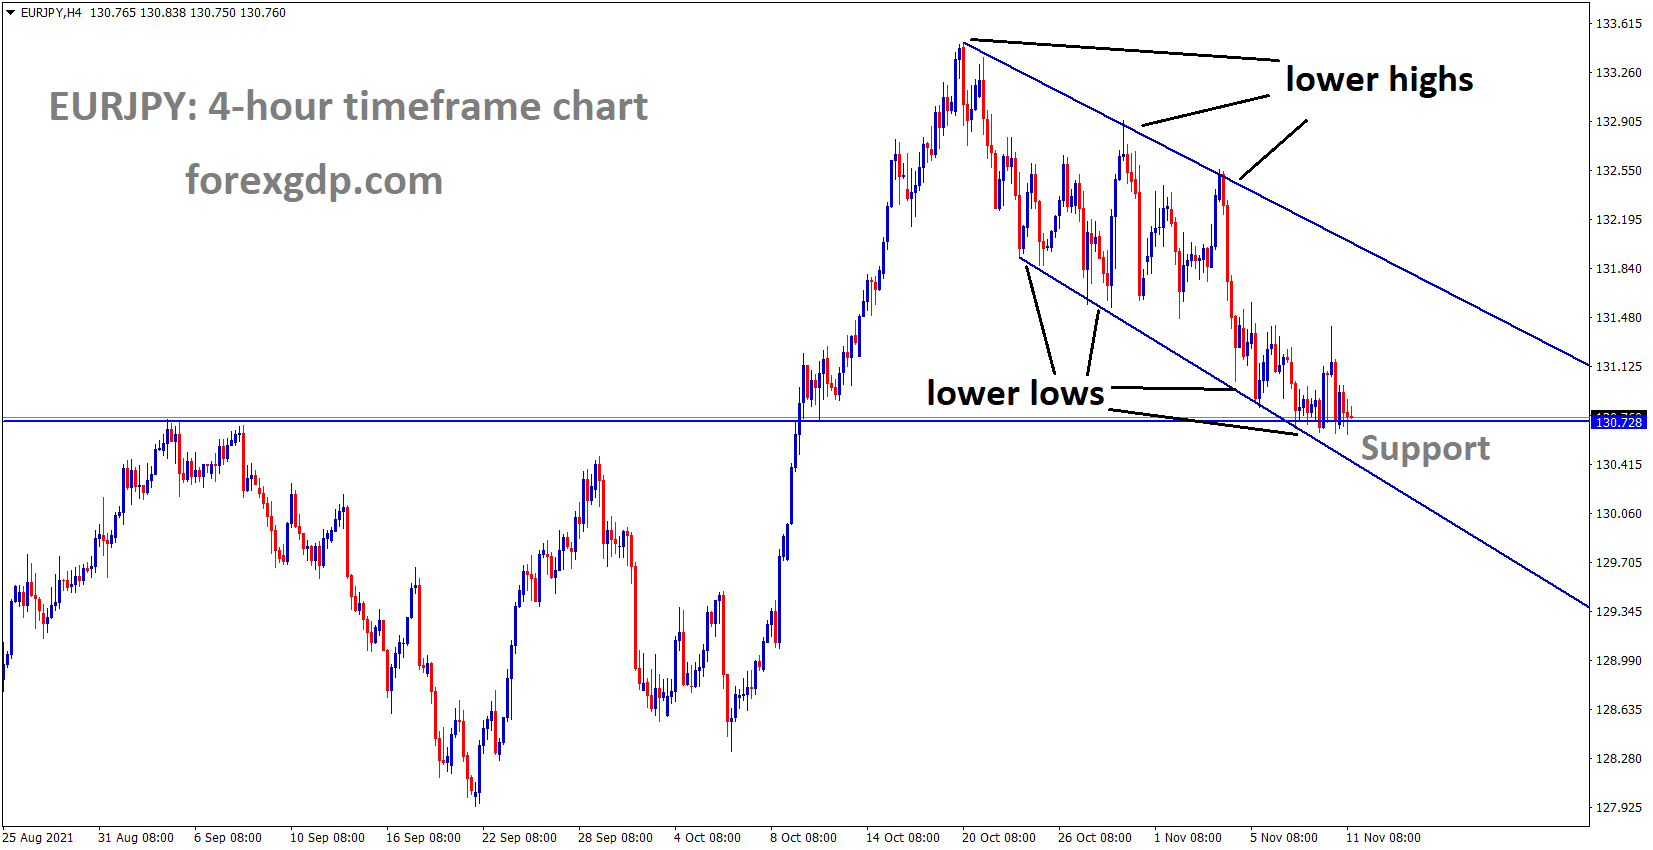 EURJPY is moving in the Descending channel and reached the Support area of the lower low of the channel